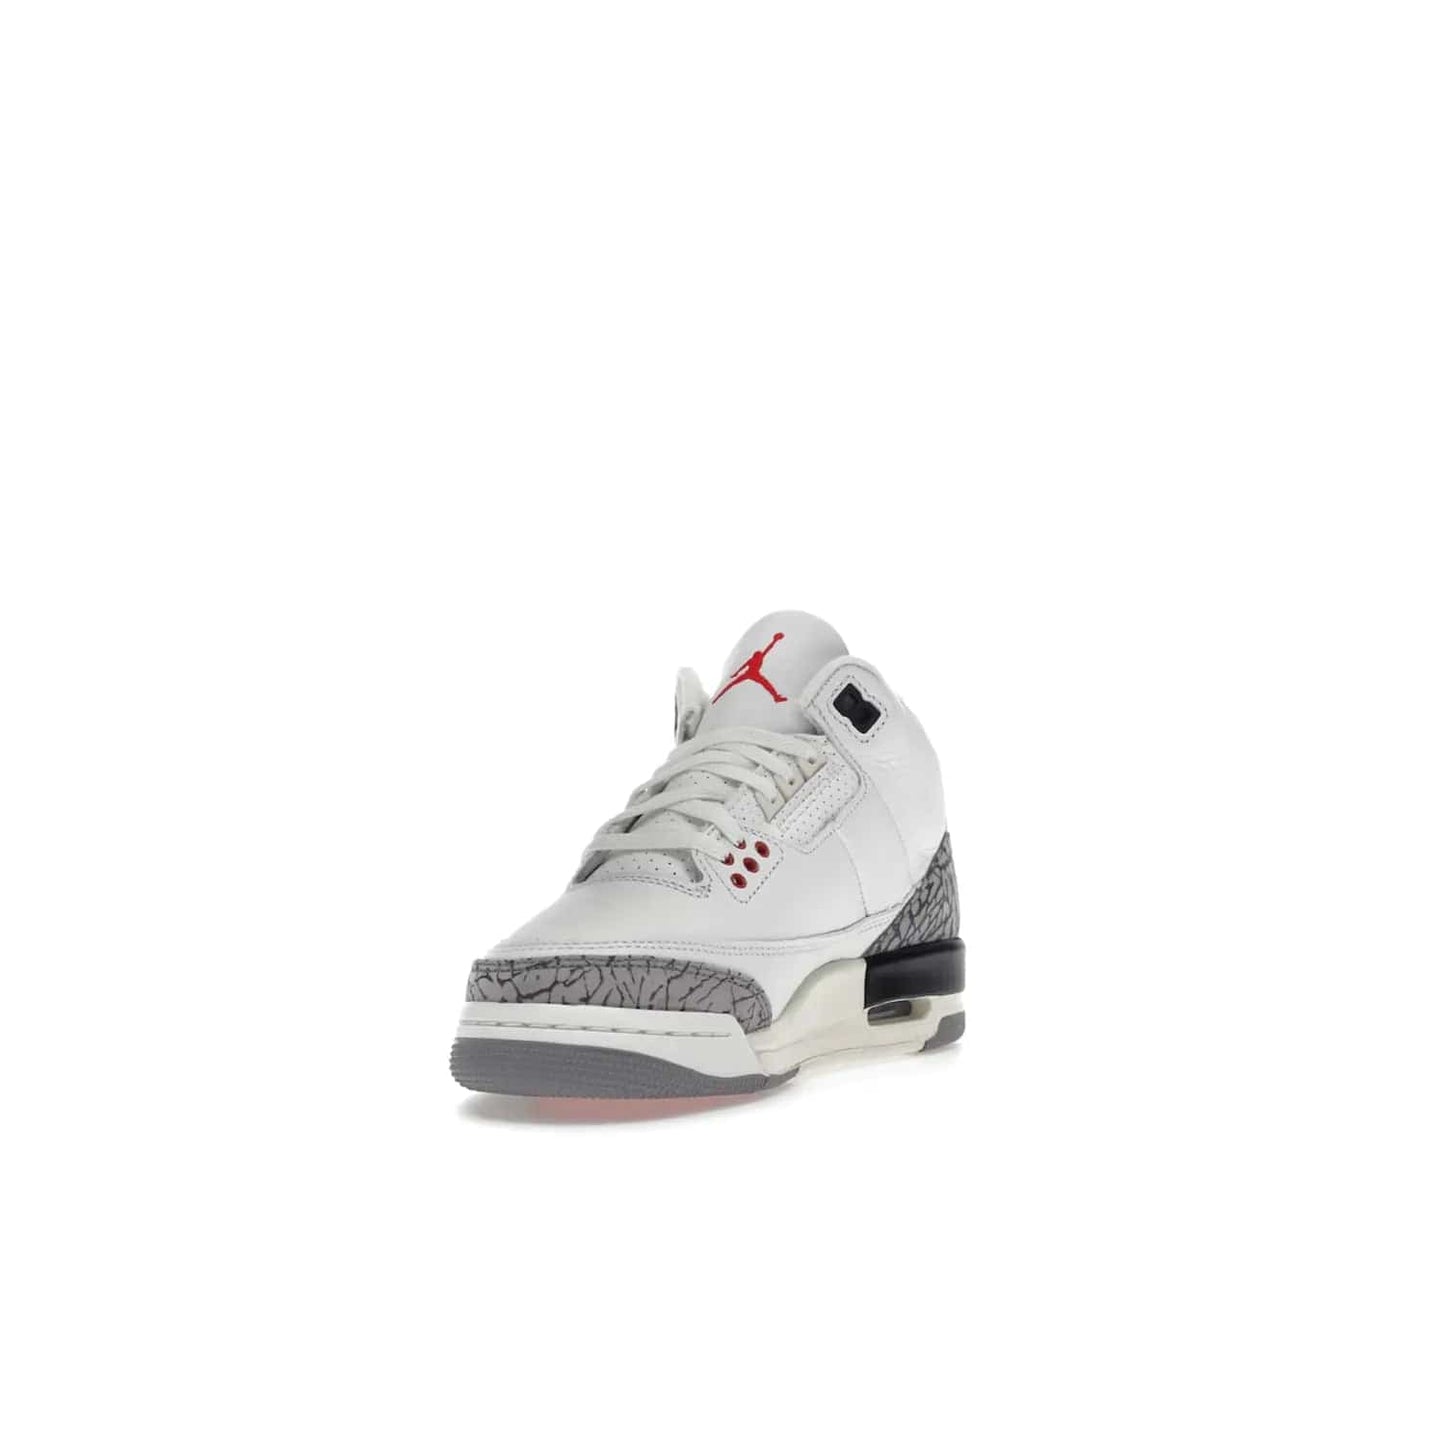 Jordan 3 Retro White Cement Reimagined (GS) - Image 13 - Only at www.BallersClubKickz.com - Grab the perfect blend of modern design and classic style with the Jordan 3 Retro White Cement Reimagined (GS). Features Summit White, Fire Red, Black, and Cement Grey colorway, iconic Jordan logo embroidered on the tongue, and “Nike Air” branding. Limited availability, get your pair before March 11th 2023.